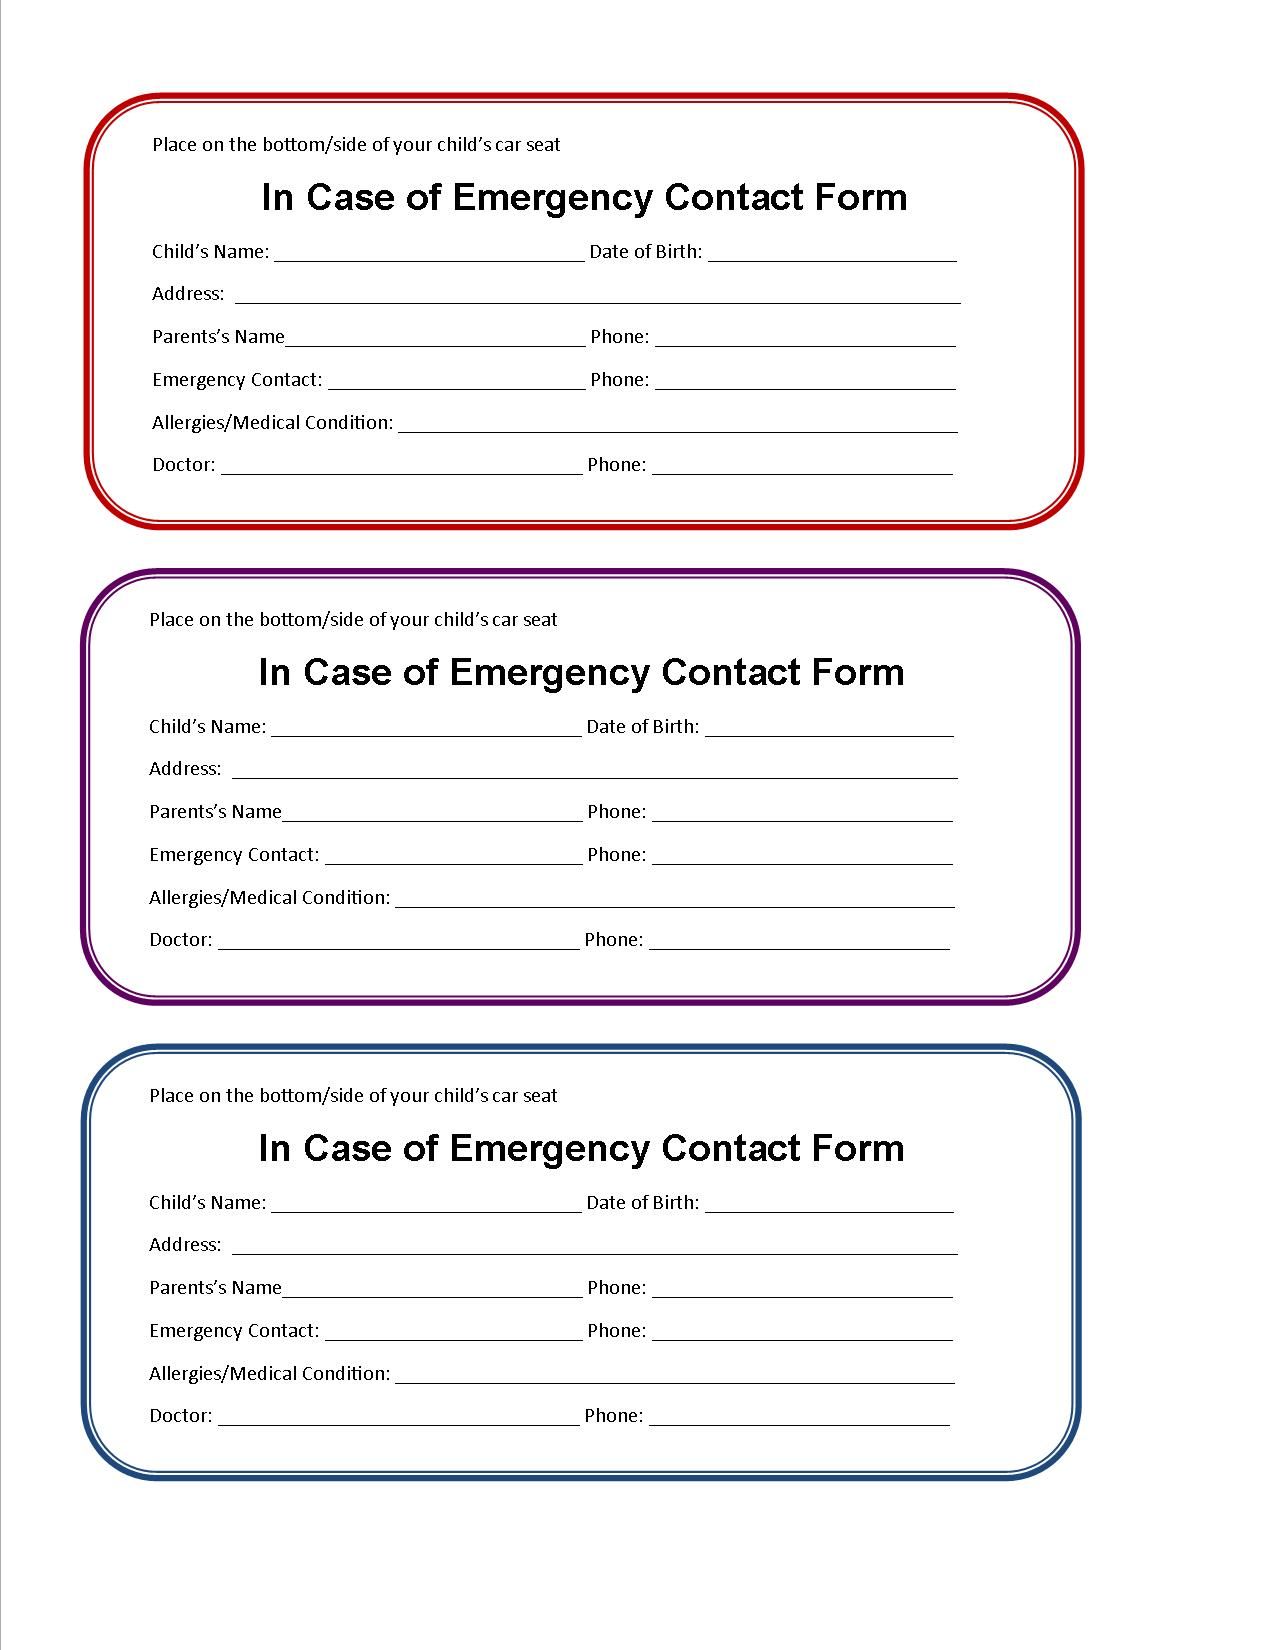 printable emergency contact form for car seat | Super Mom I am 